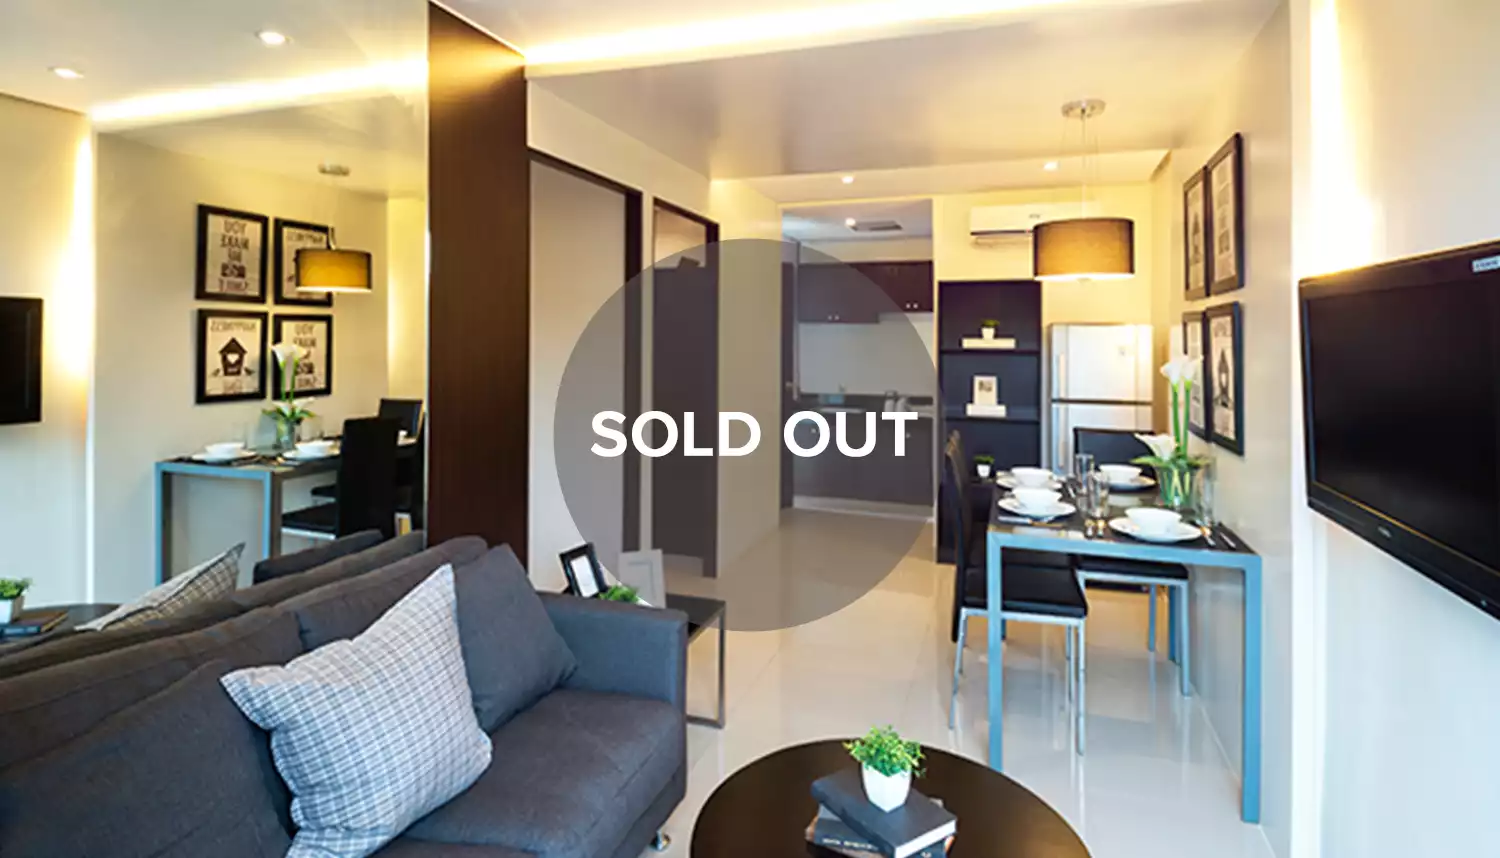 /assets/properties-house-model-gallery-and-landmarks-icons/lumina-home-models/home-model-gallery/aira-rowhouse/lumina-aira-rowhouse-sample-interior-sold-out-1.webp